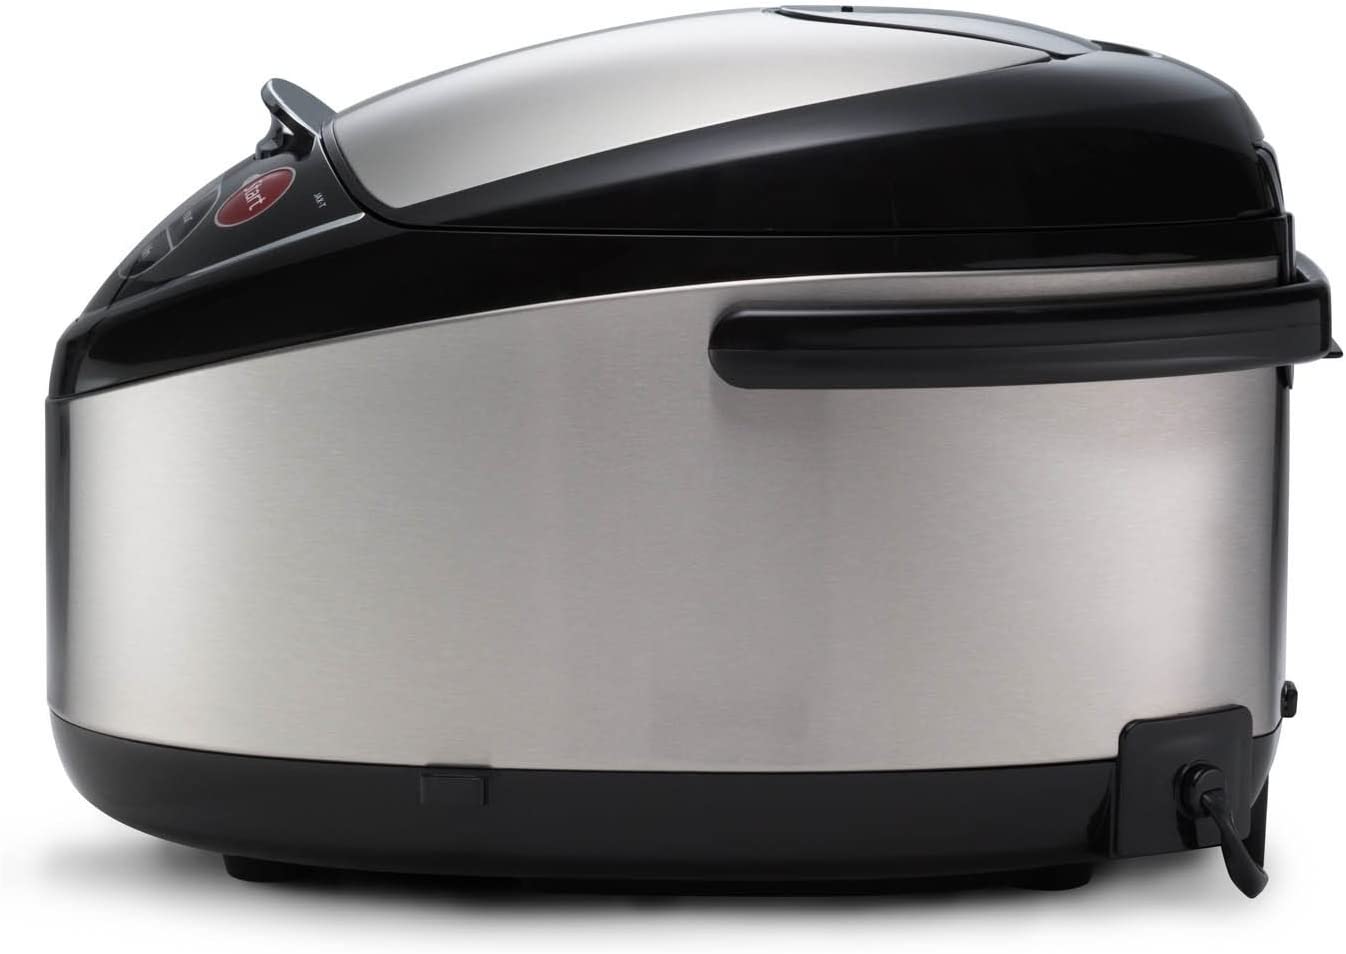 Tiger Micom Rice Cooker with Food Steamer &amp; Slow Cooker, 10-Cup (Uncooked)